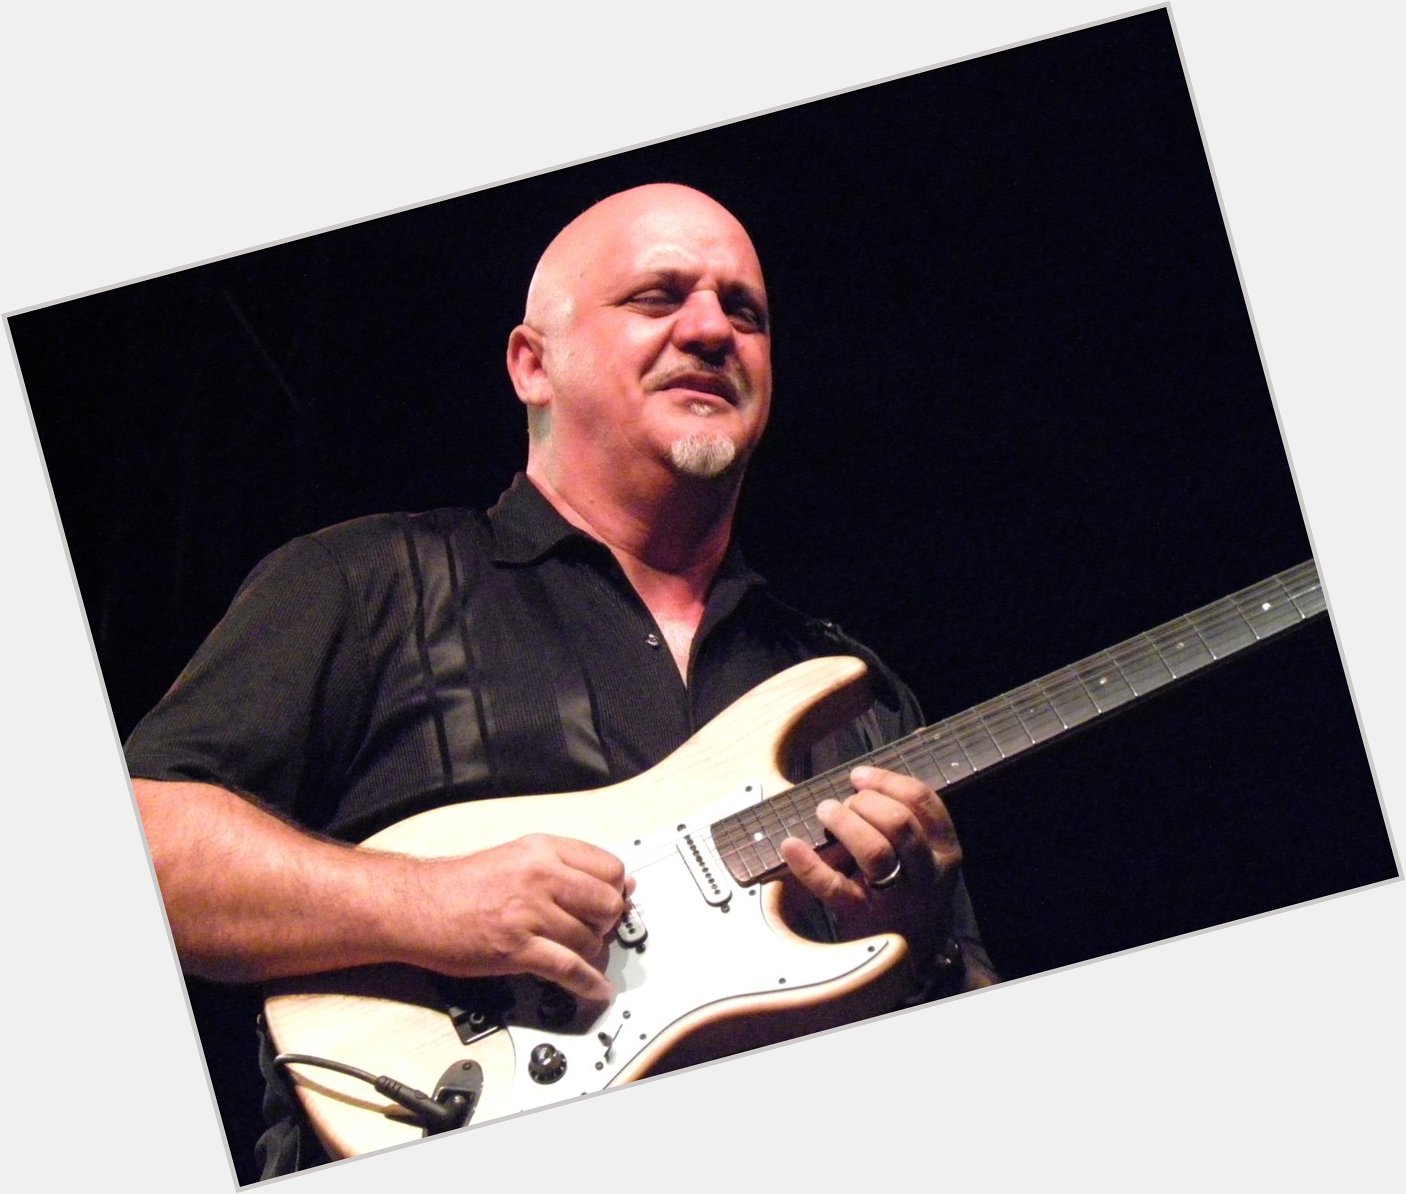 Happy birthday to Frank Gambale! Frank turns 62 today - have a rock solid day!   